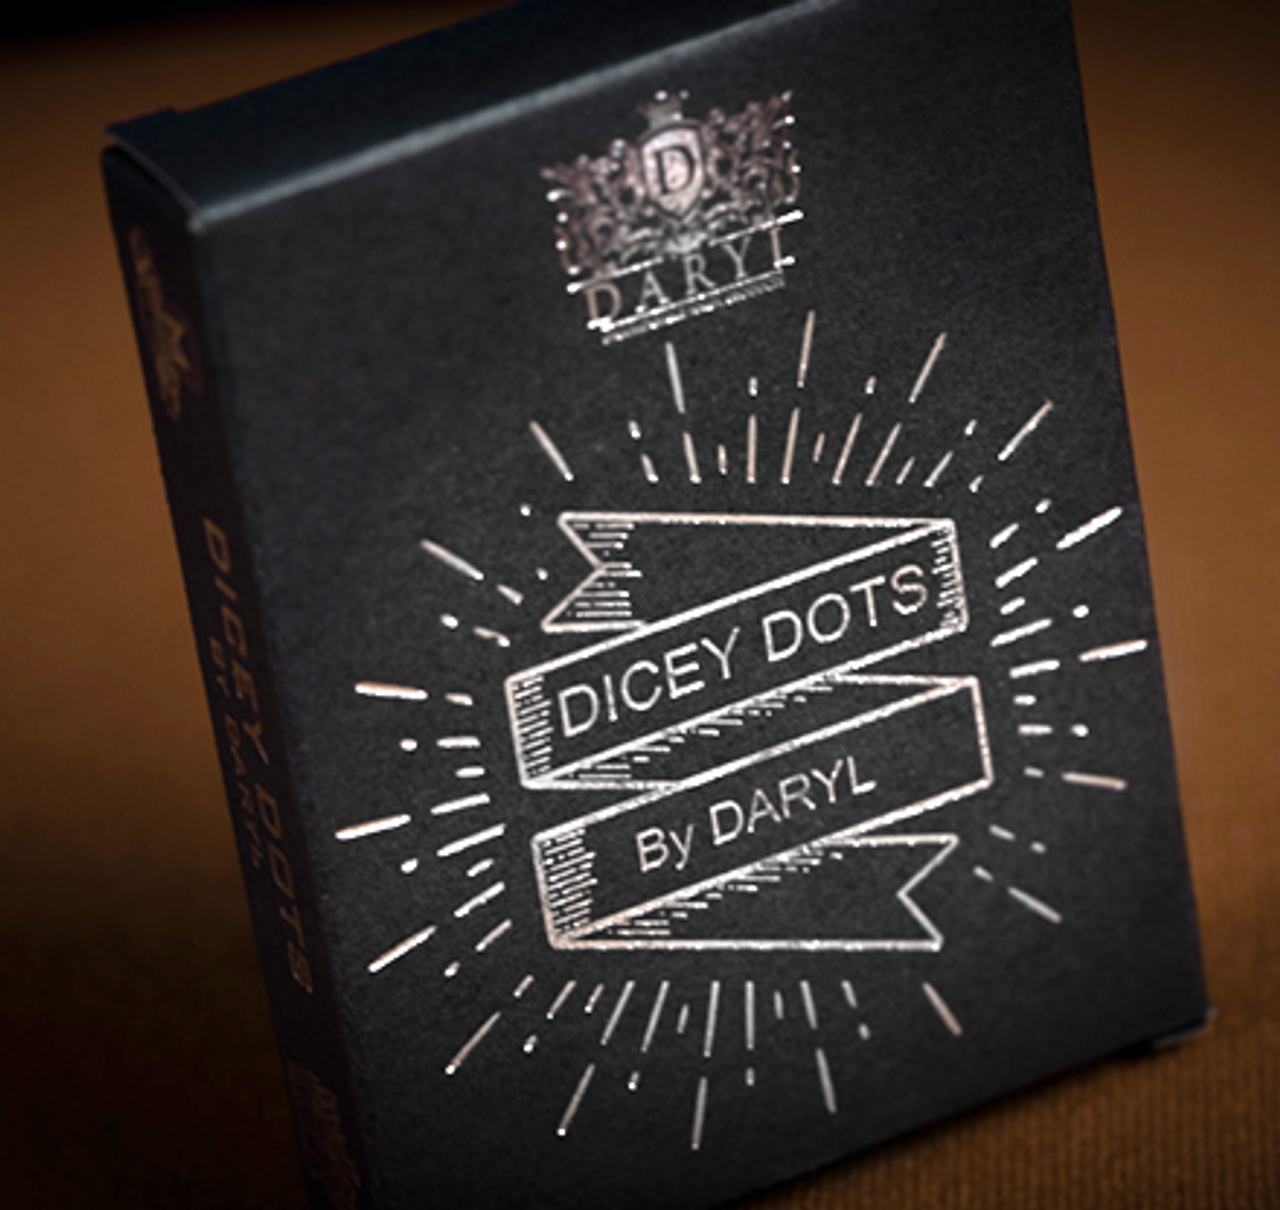 Dicey Dots by Daryl Magic Trick Dice Paddle